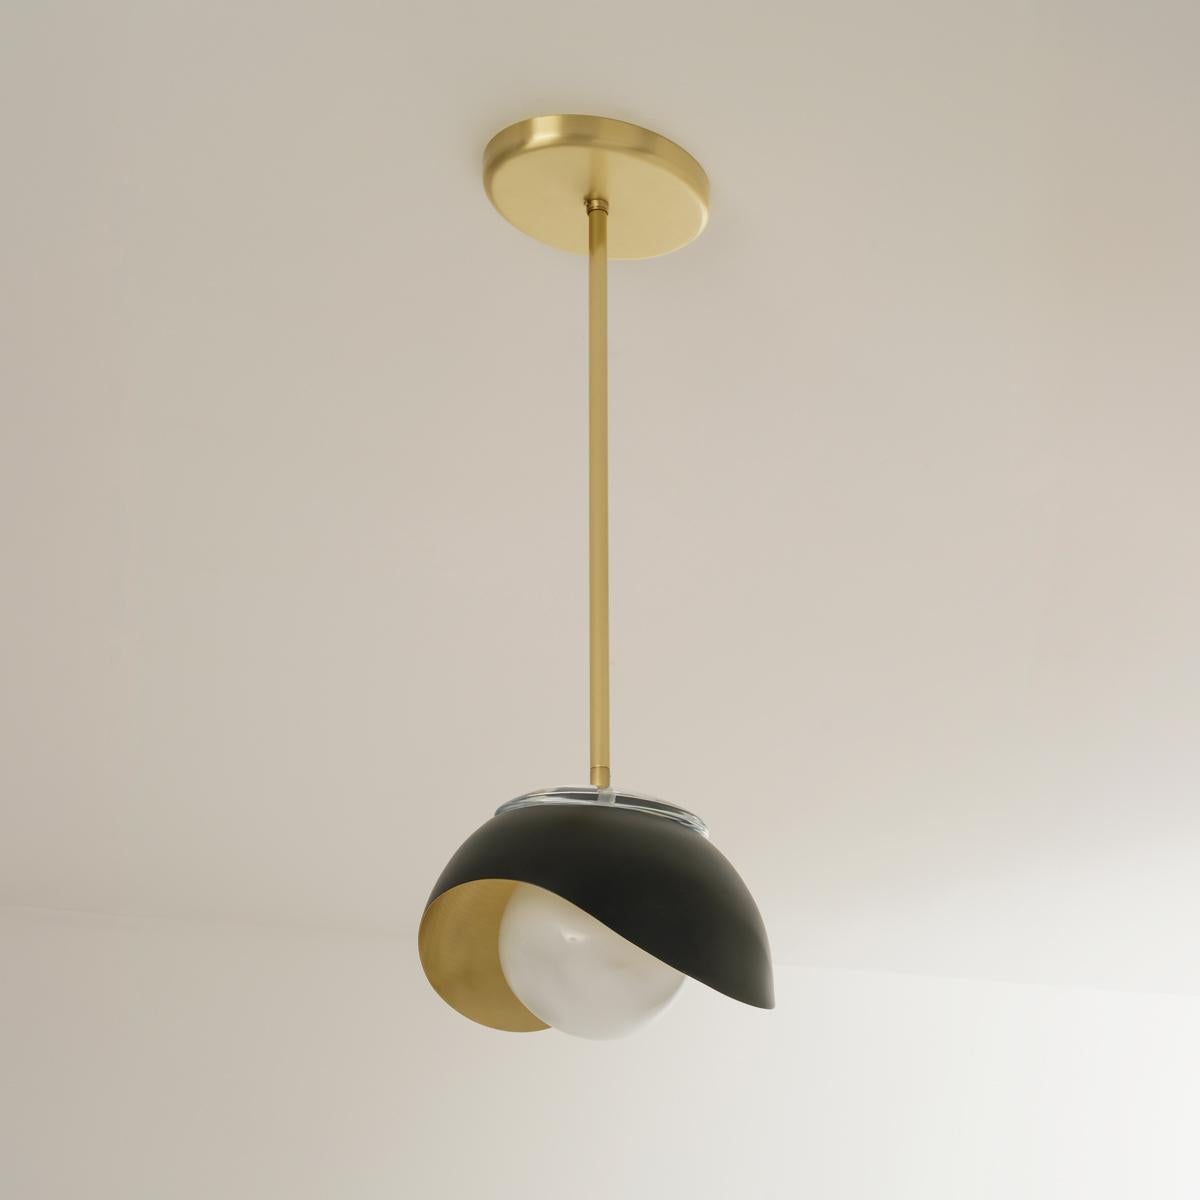 Perla Pendant by Gaspare Asaro-Black and Satin Brass For Sale 1